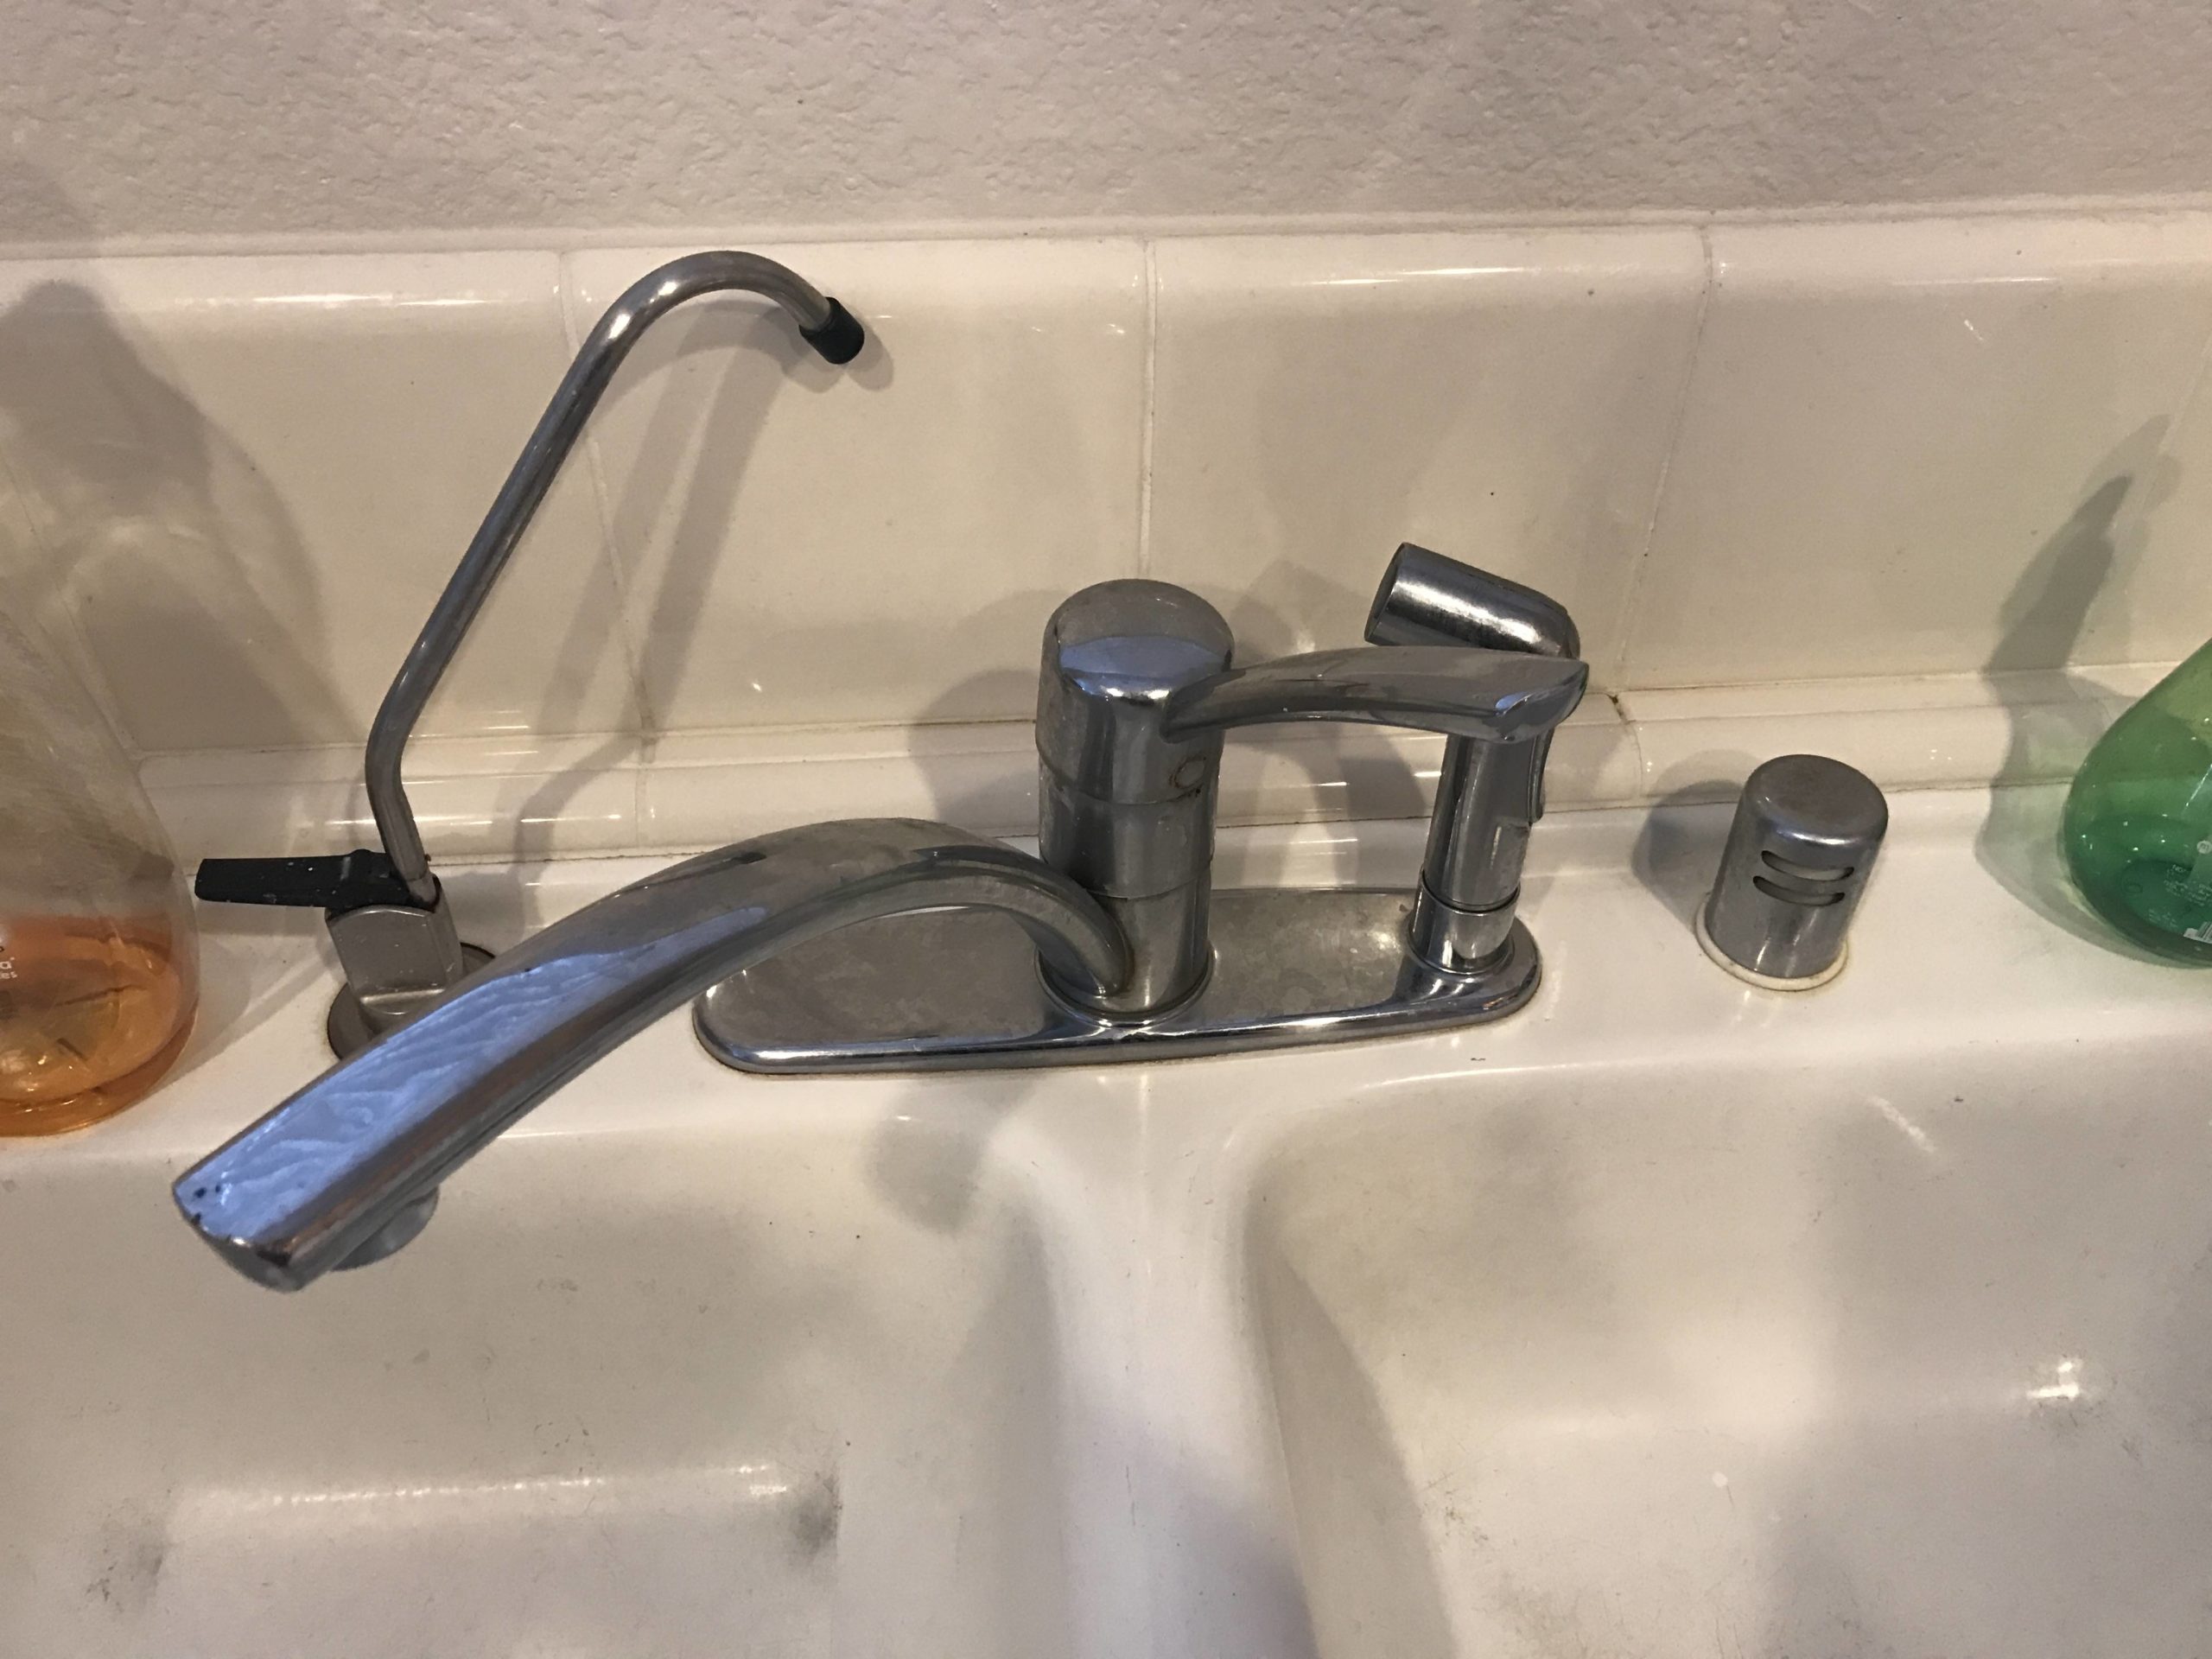 my kitchen sink doesn't have a vent